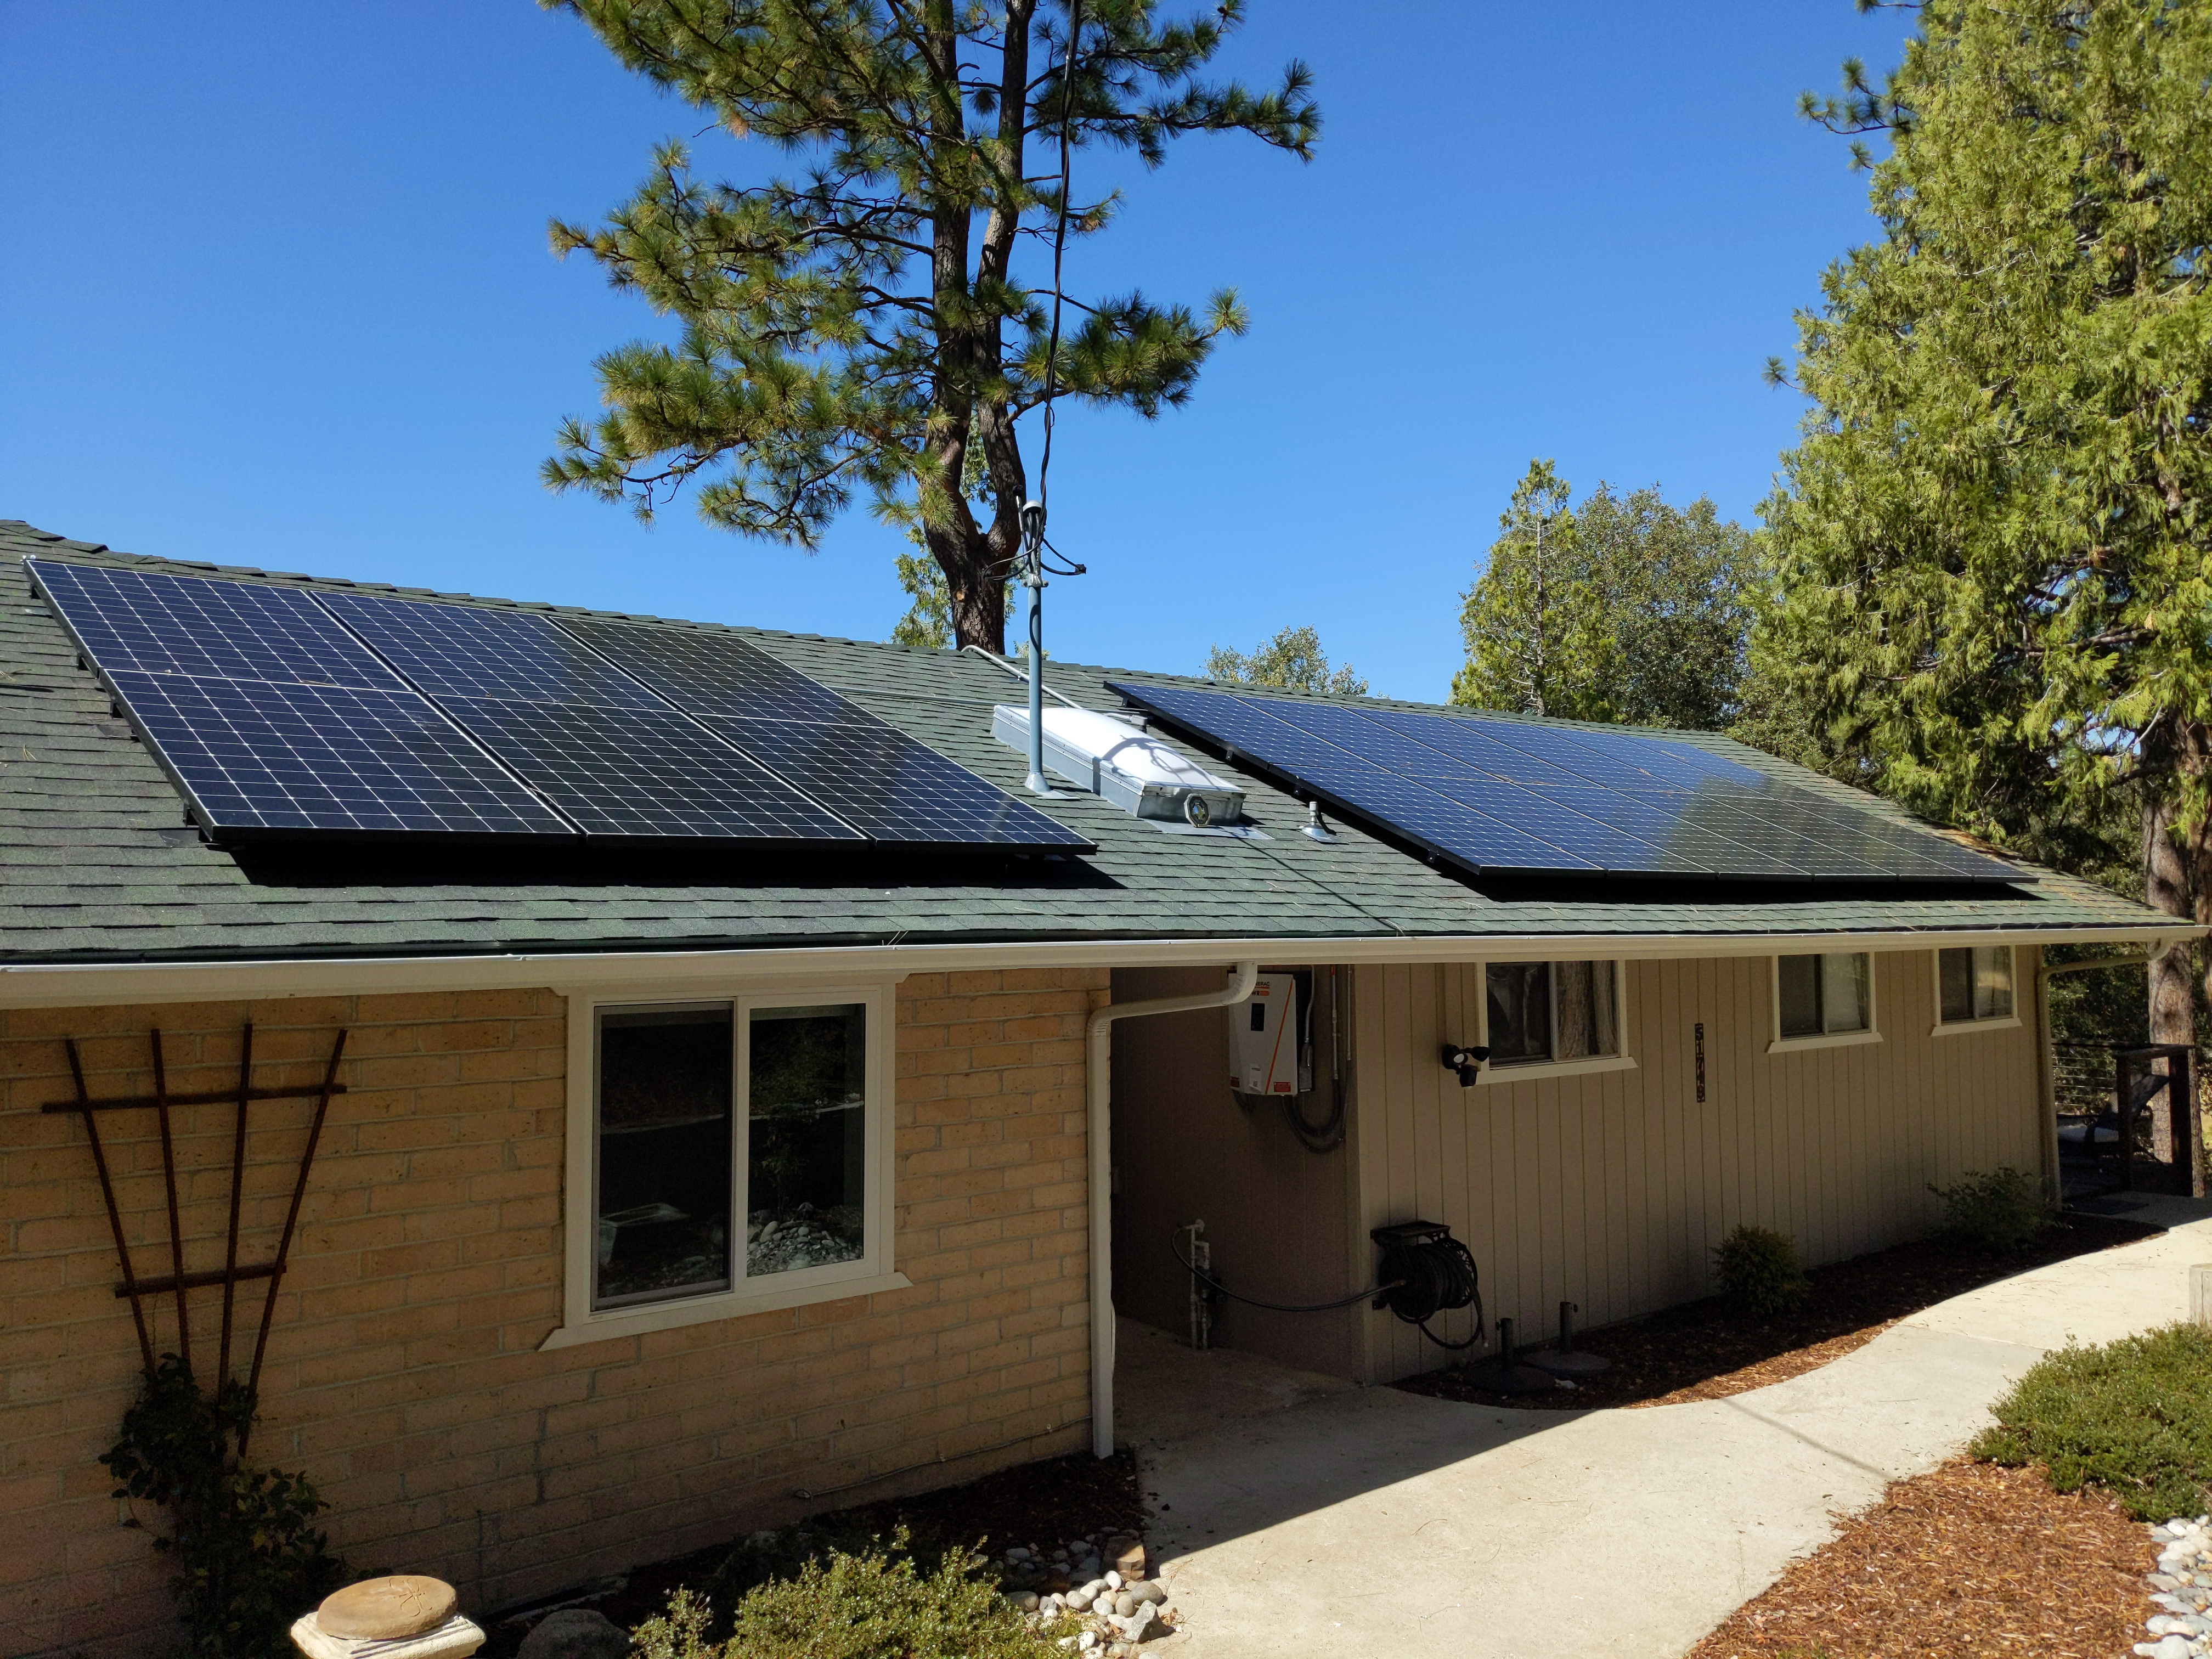 Solar panels on a private home in California